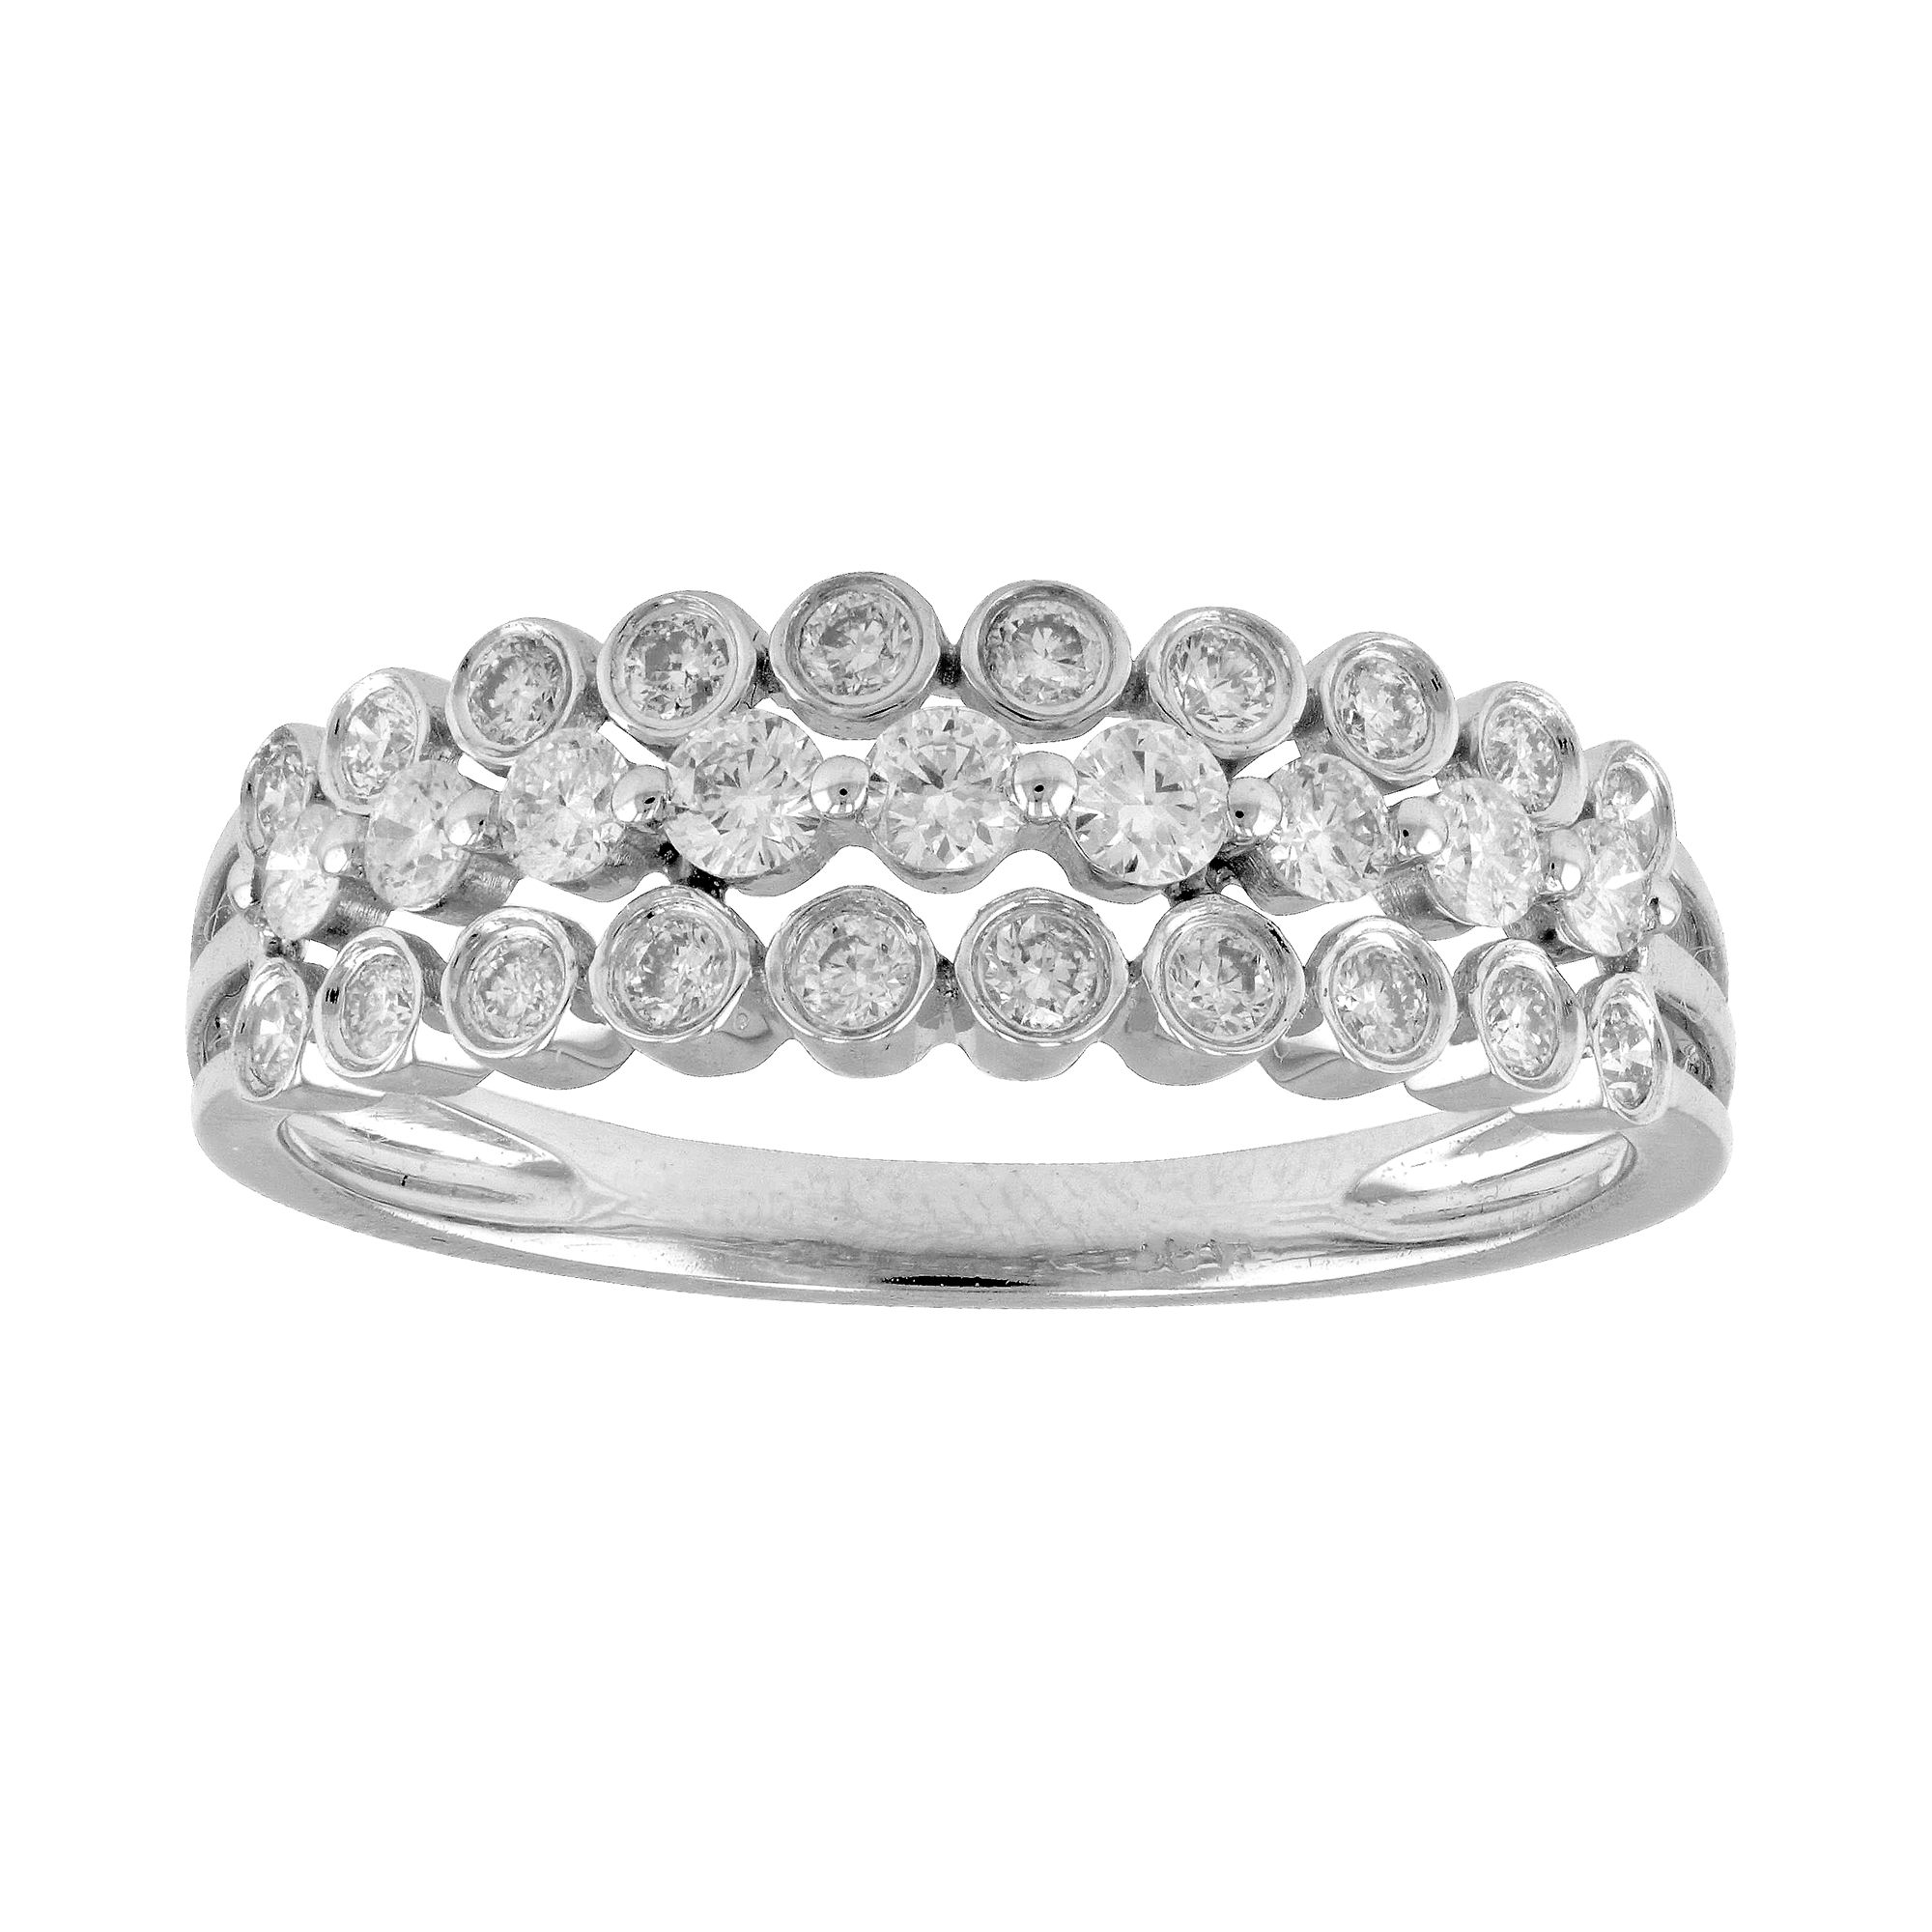 View 0.53ctw Diamond Band in 18k White Gold